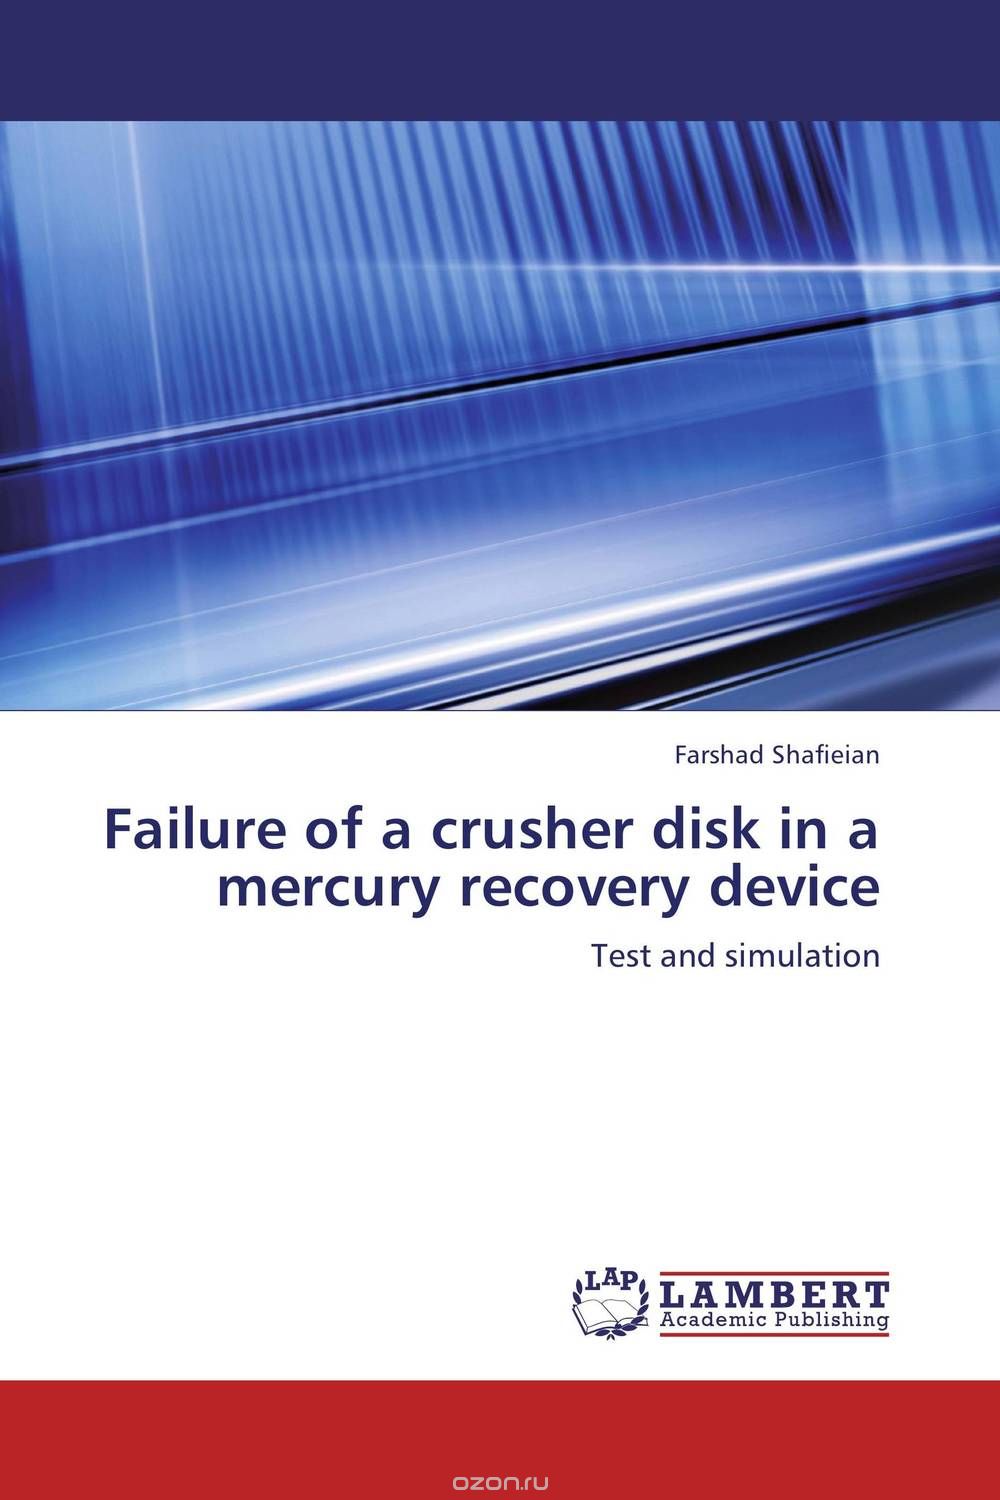 Failure of a crusher disk in a mercury recovery device